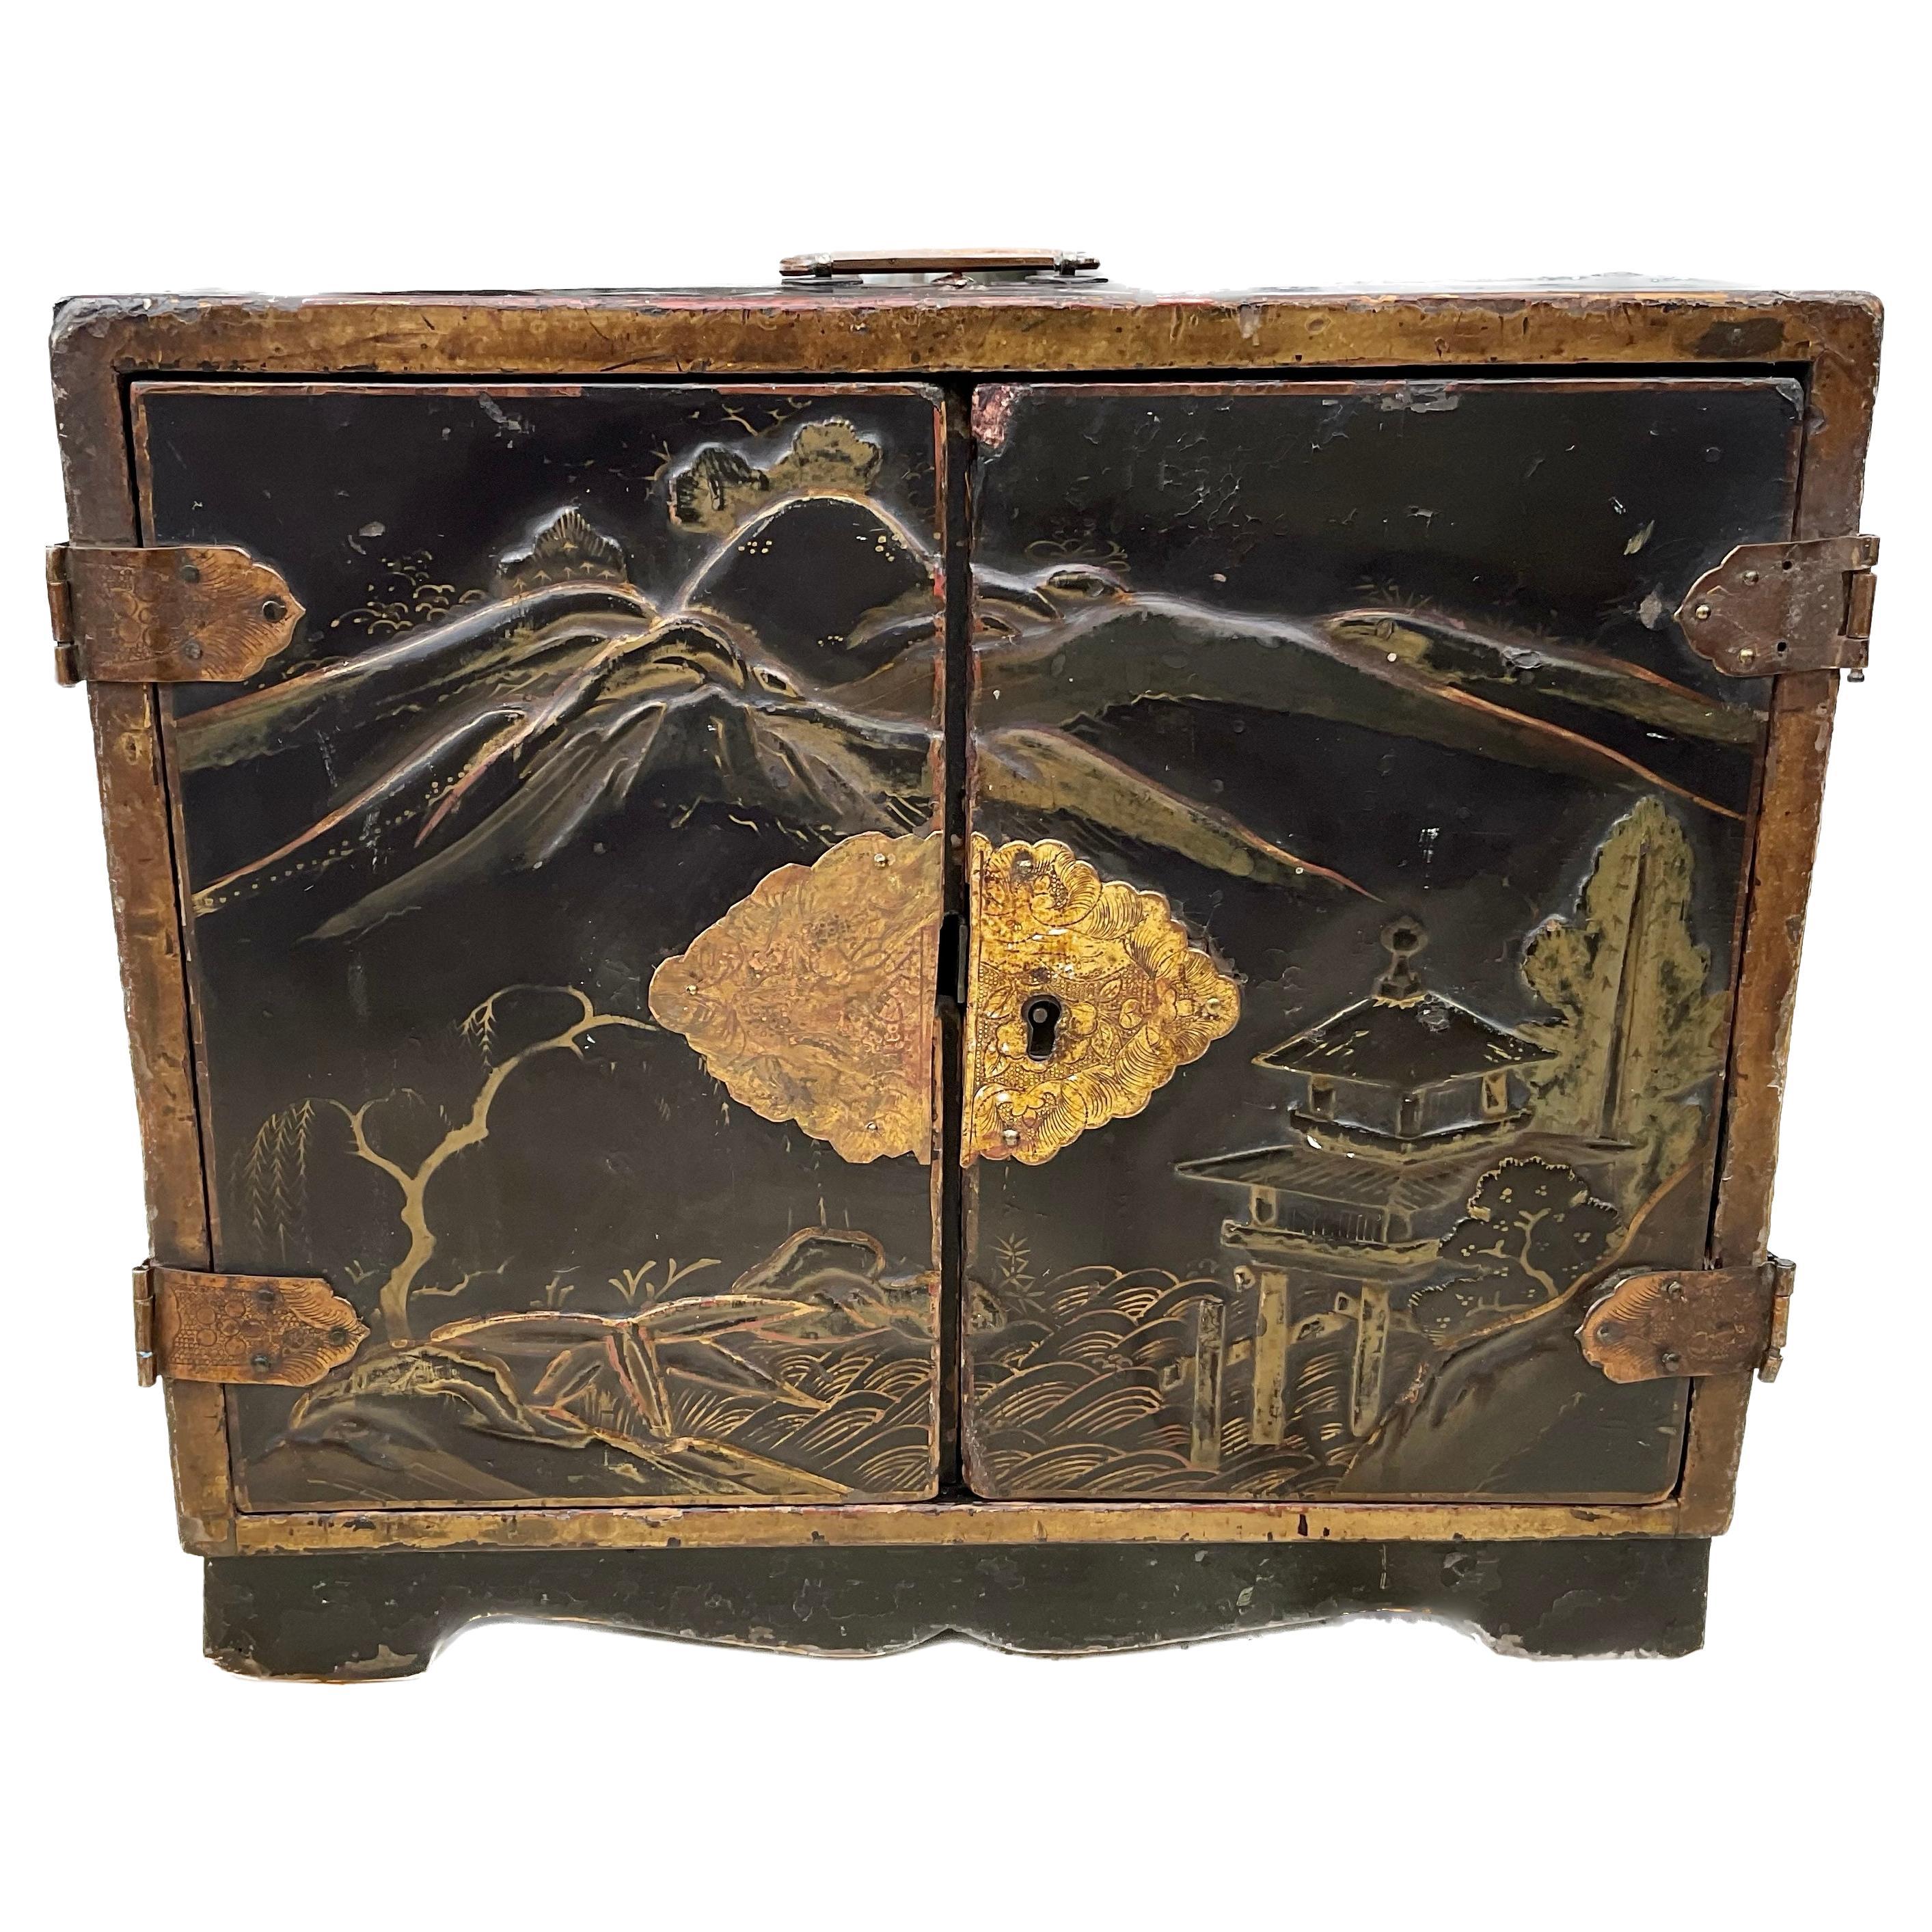 19th Century Japanese Chinoiserie Lacquer Chest